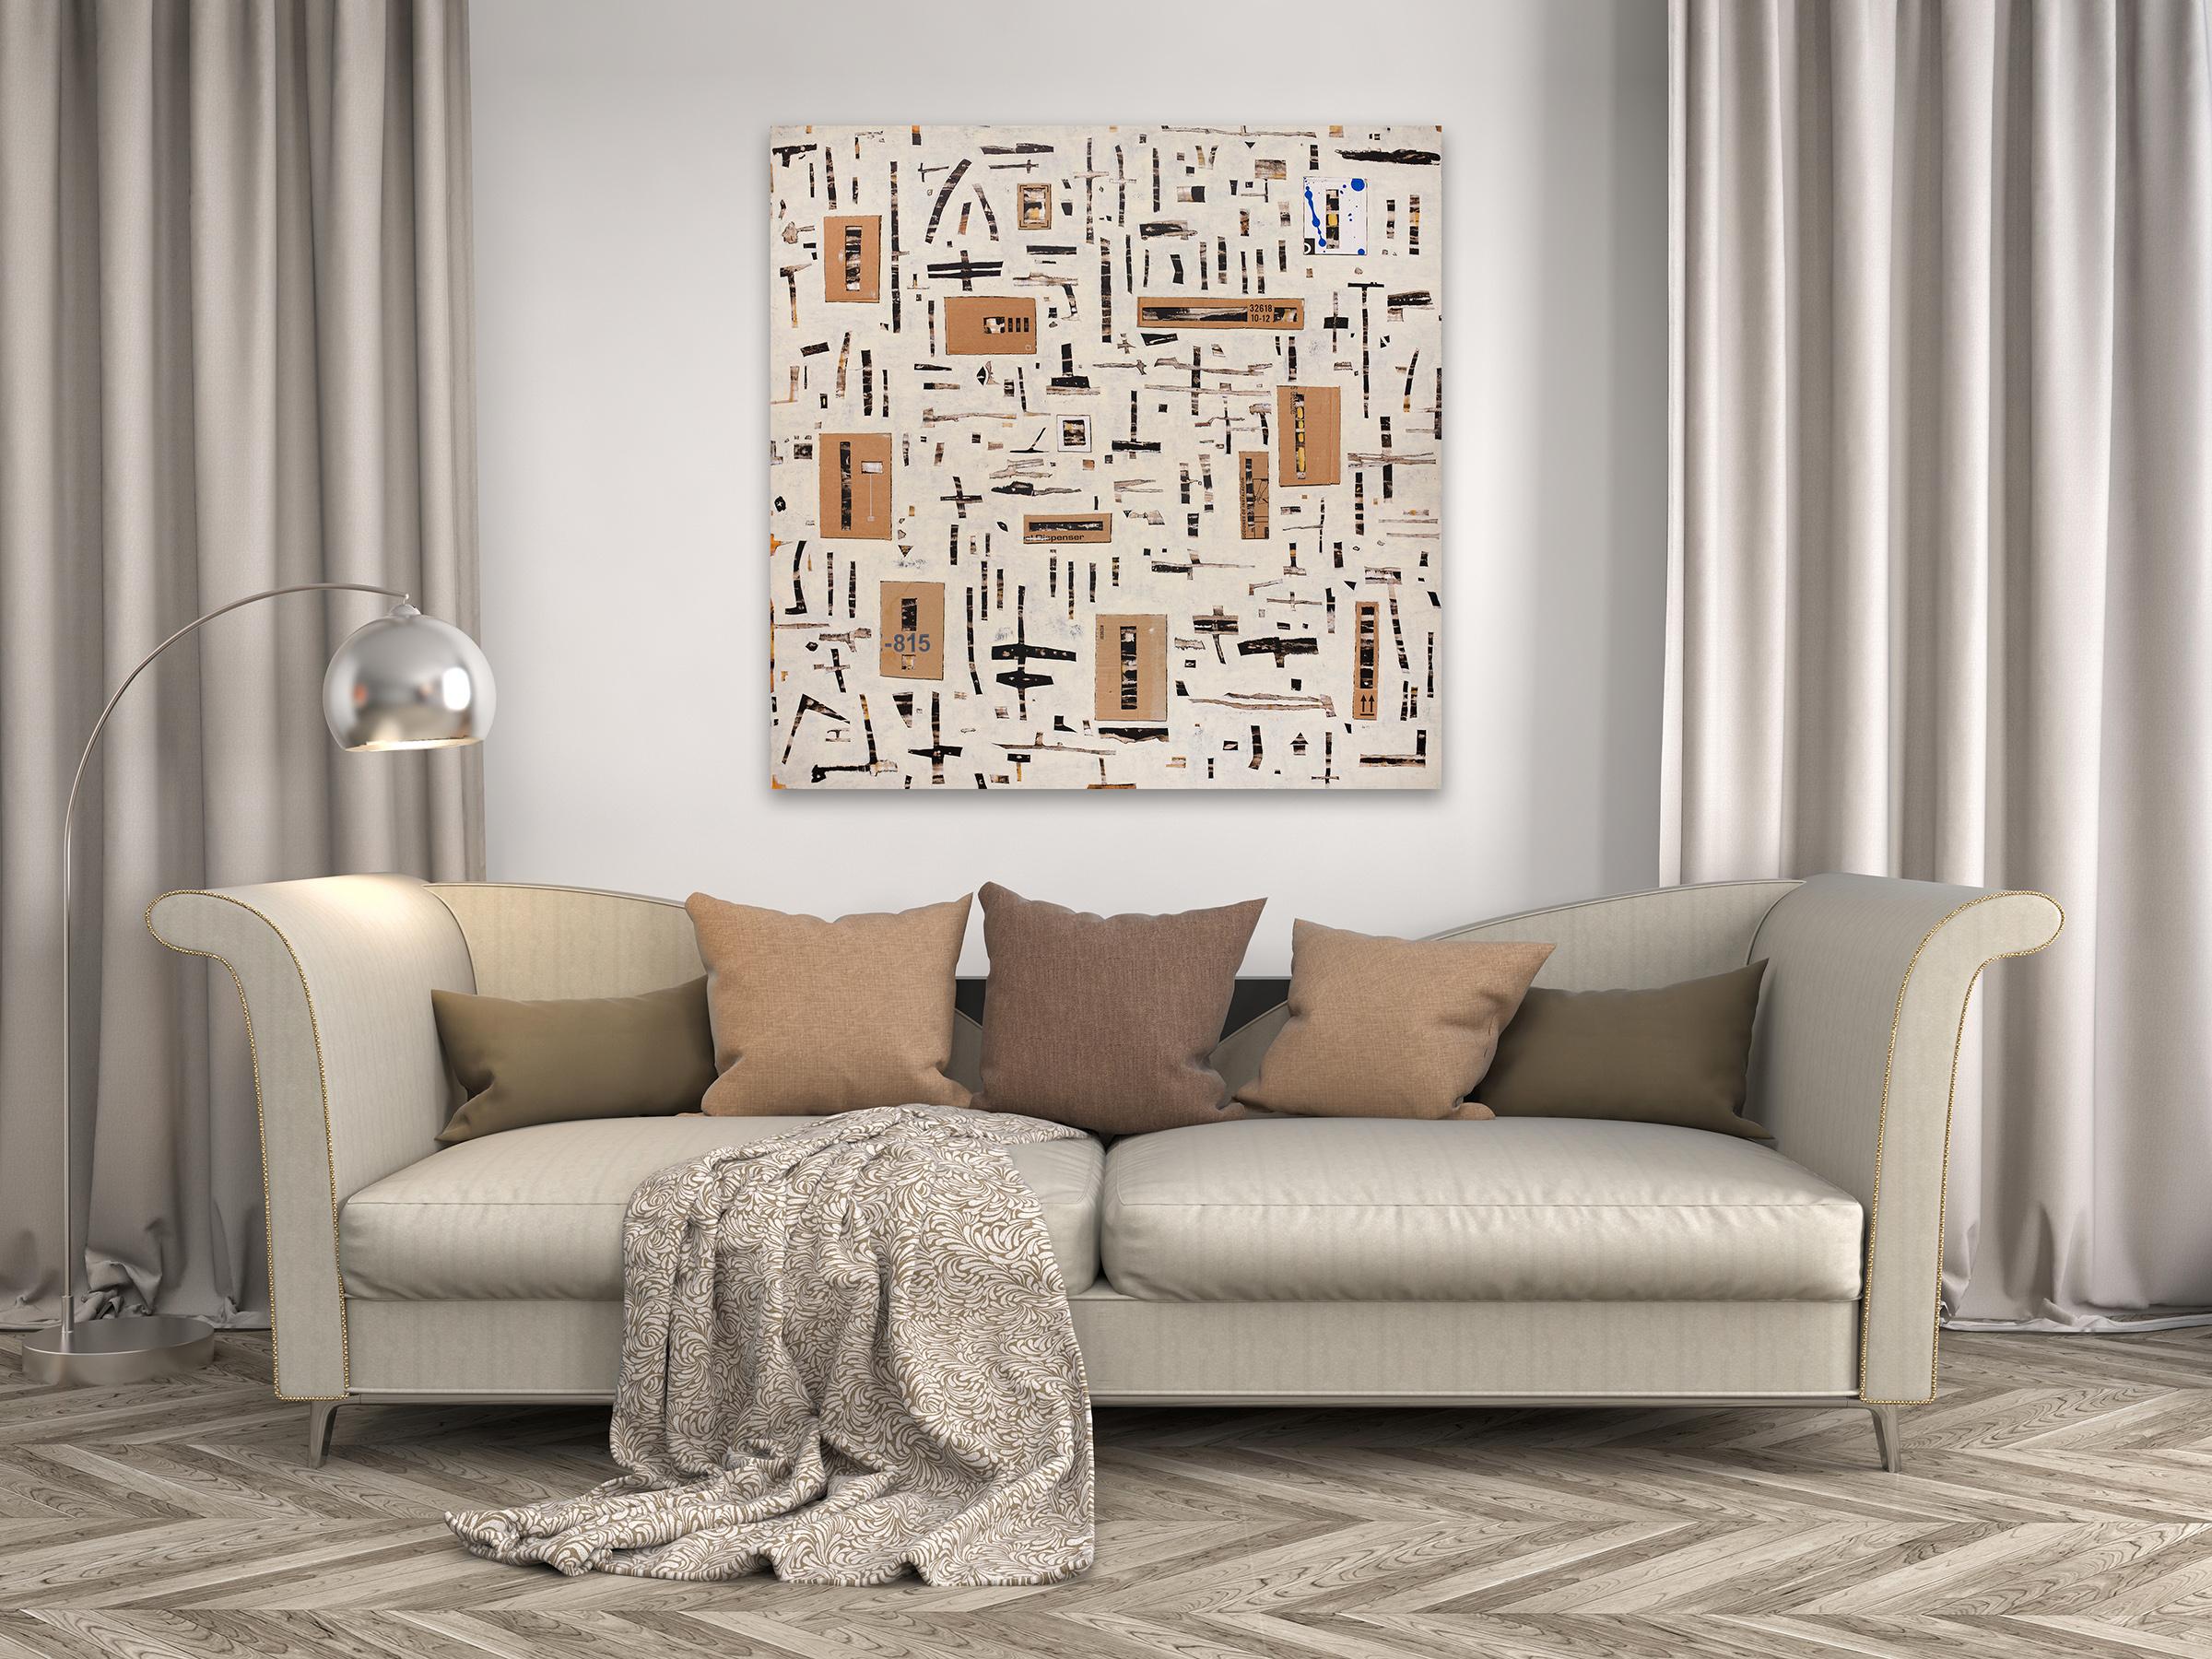 This abstract contemporary painting is made with acrylic pain, cardboard, and Persian tea on canvas. It features a neutral palette, with a warm, light beige background, and brown, black, and beige criss-crossing rectangular shapes patterned